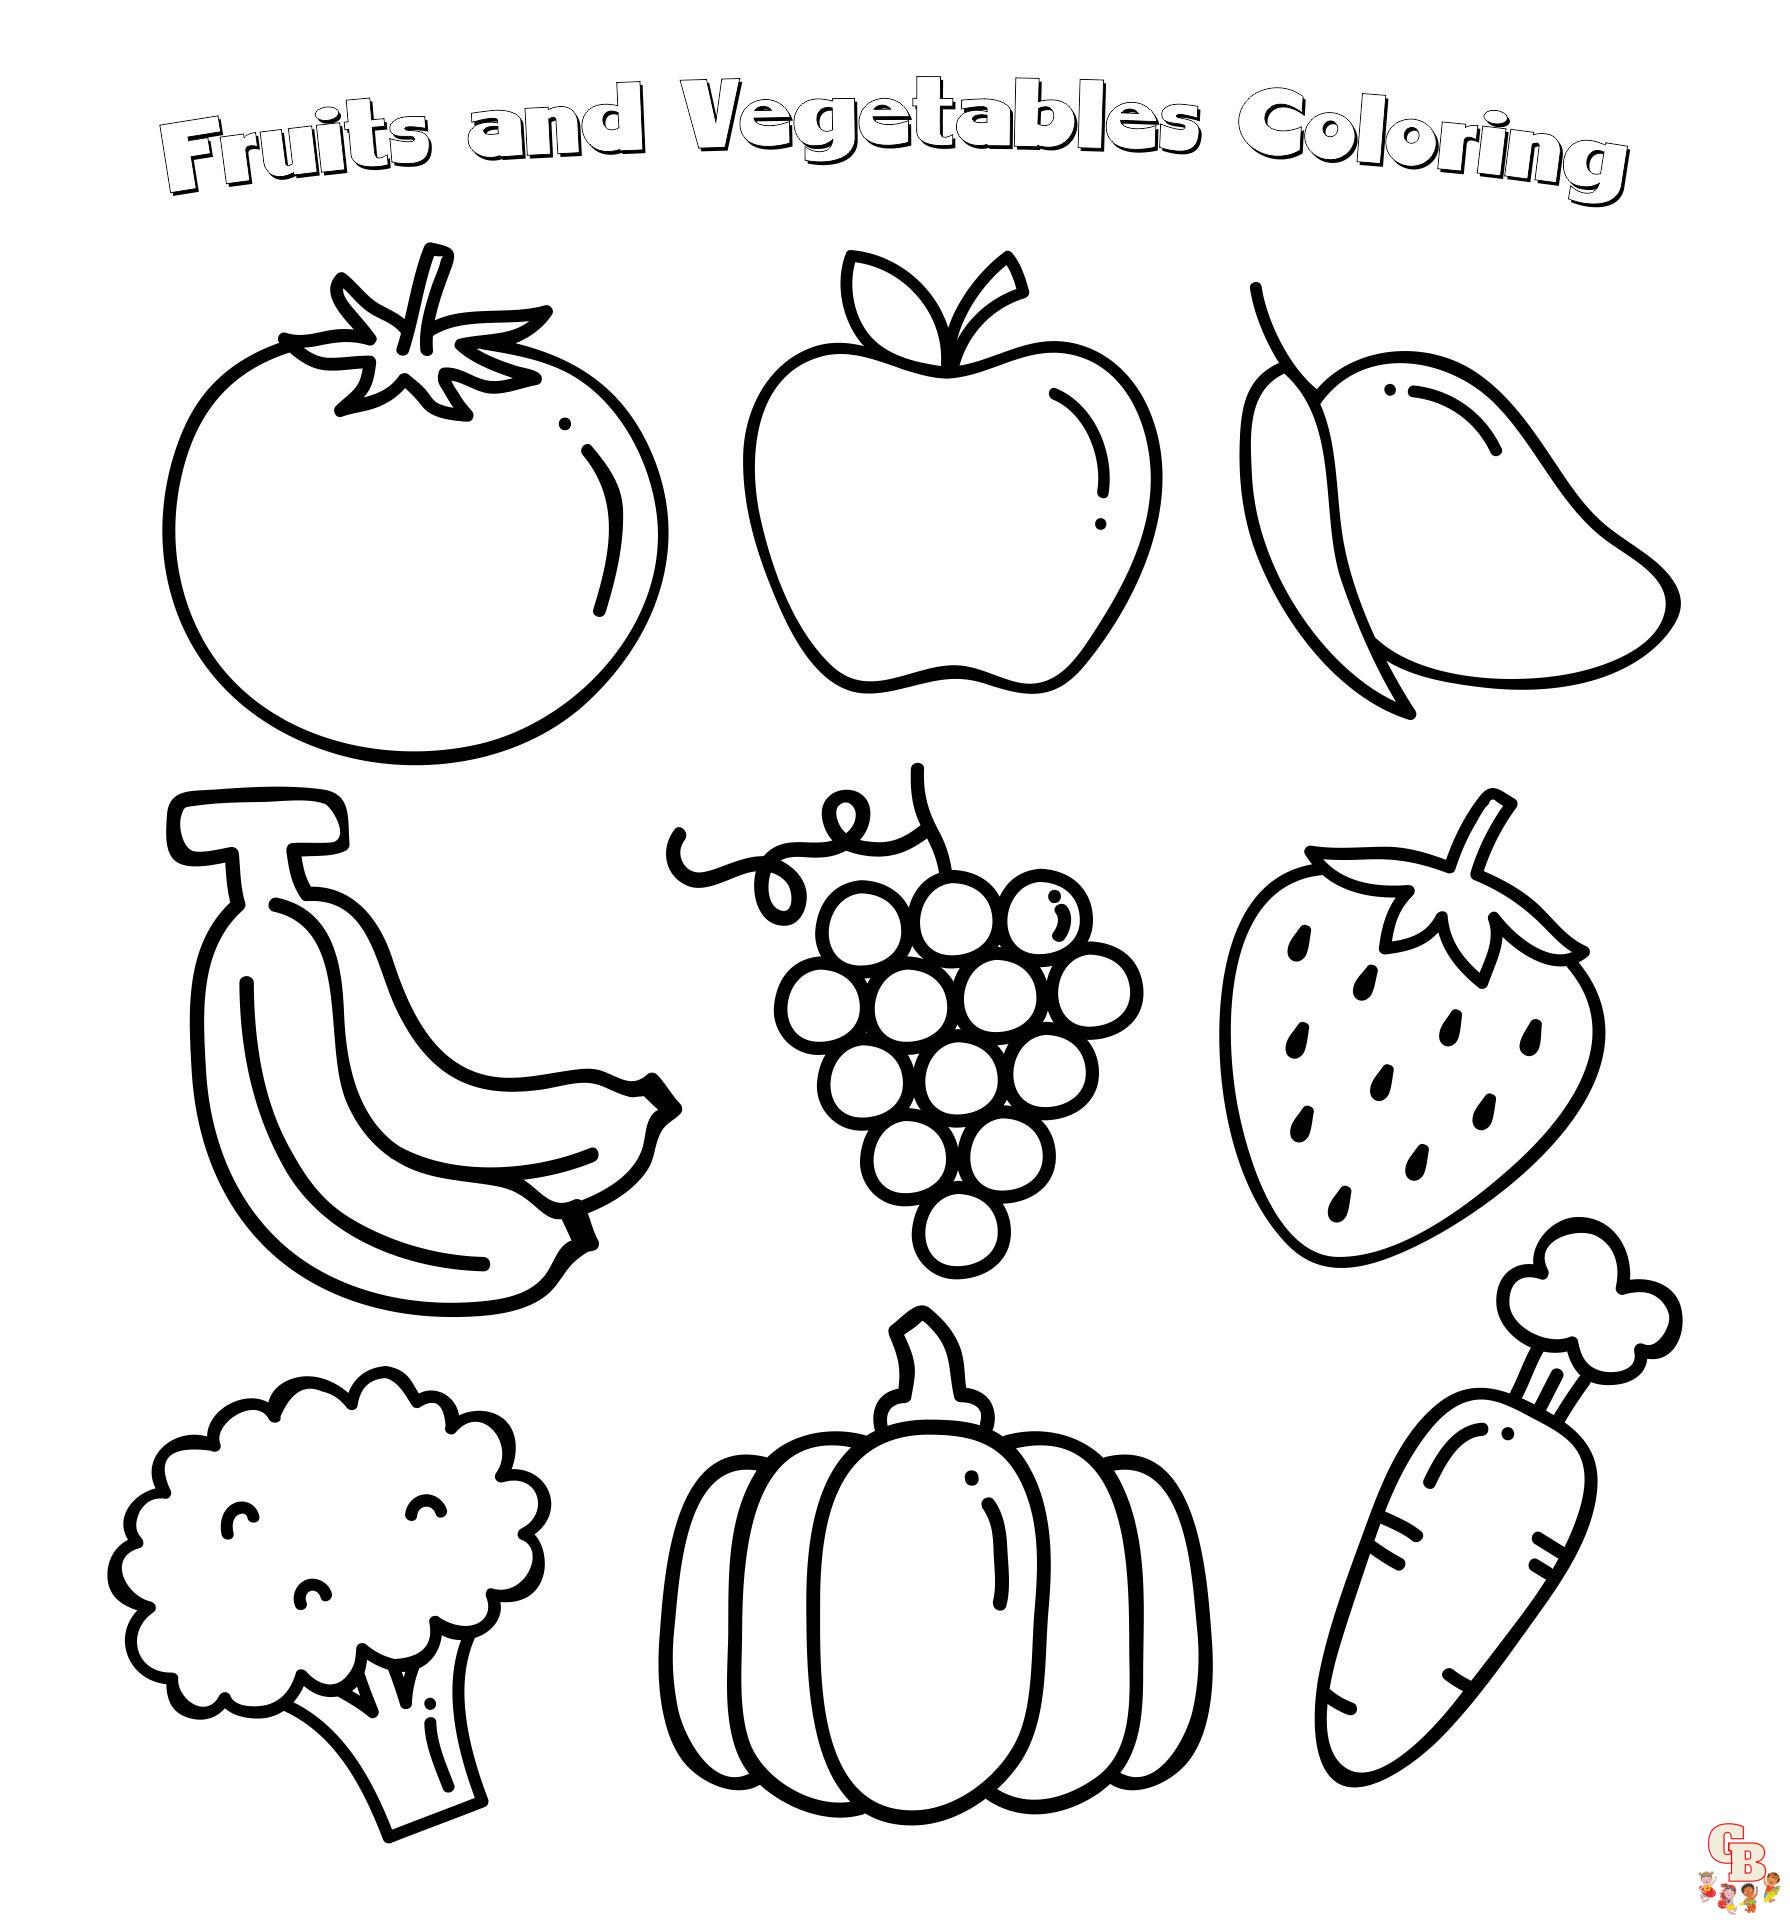 Fruit and Vegetable Coloring Pages 6